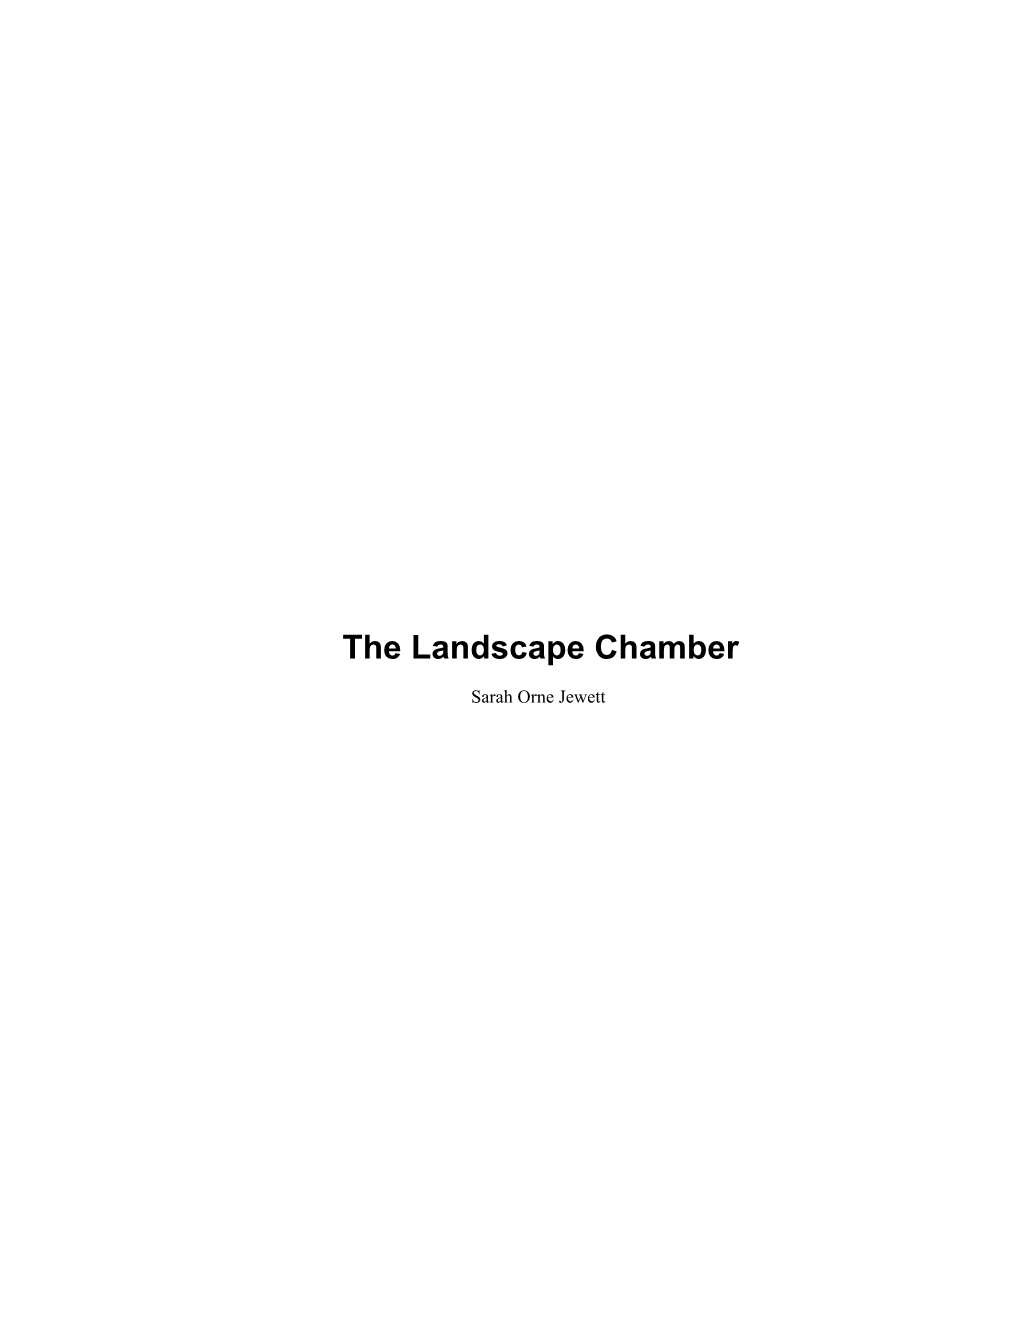 The Landscape Chamber